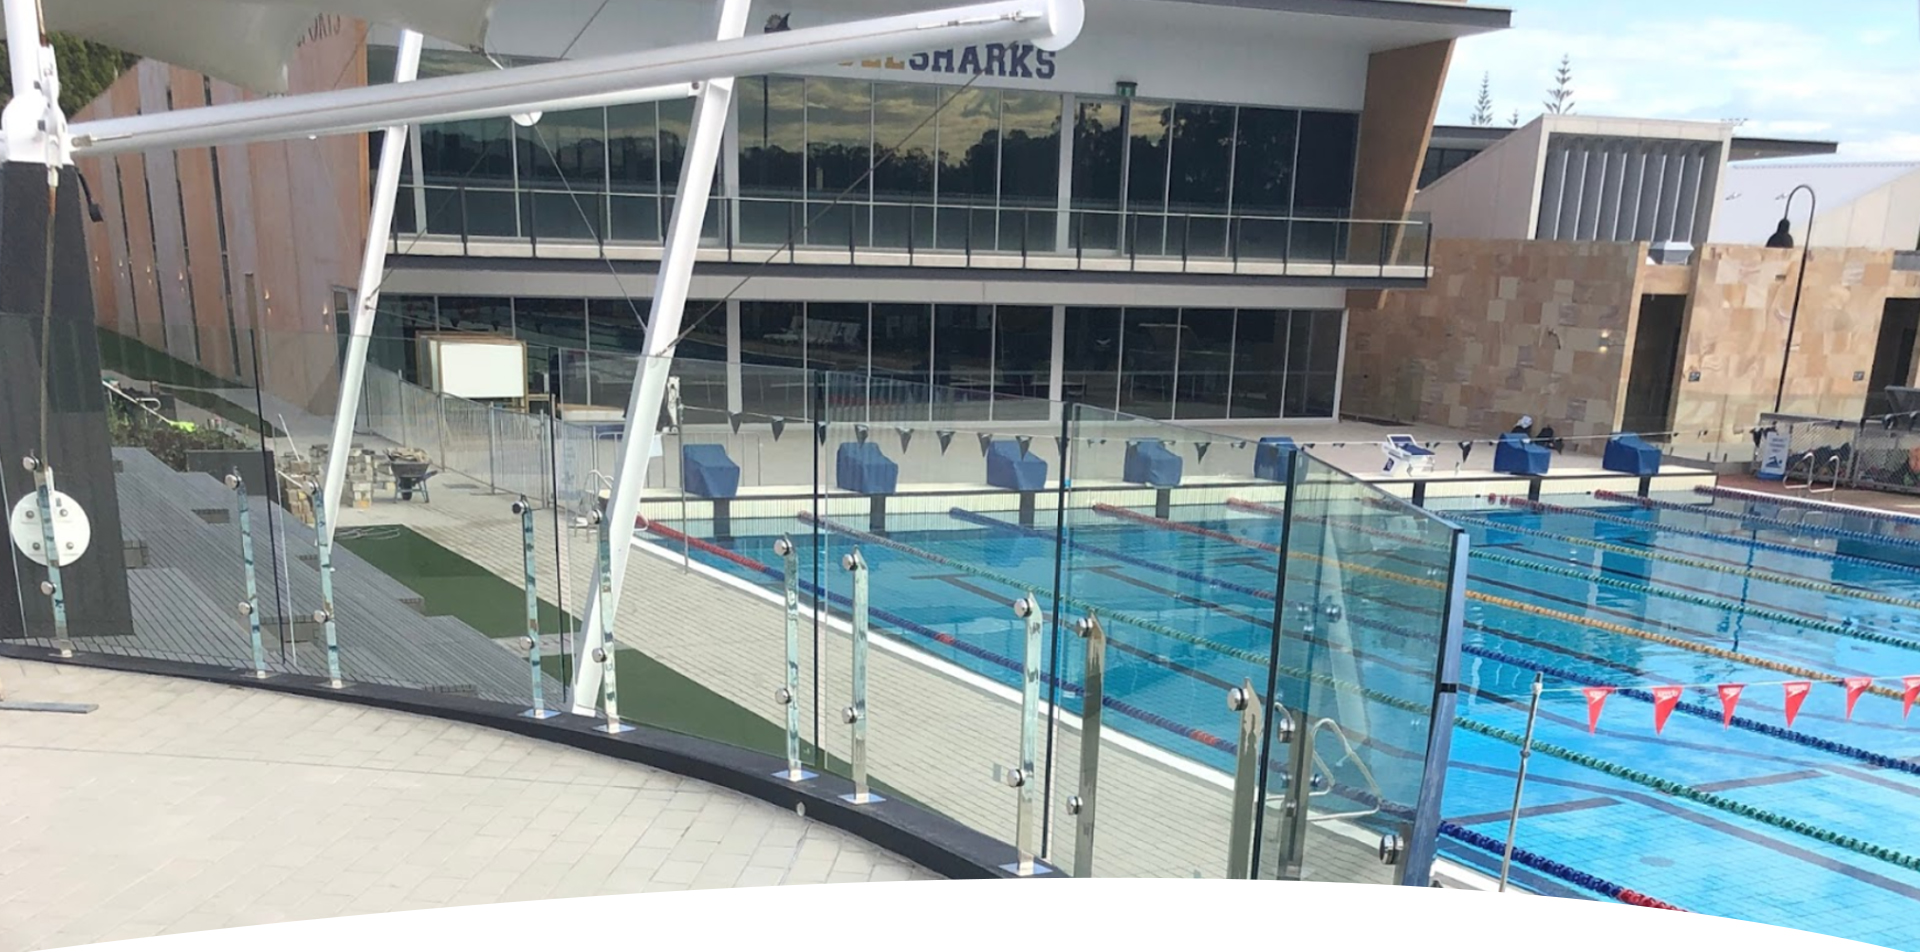 Providing The Final Touches for Bond University’s New Swimming Pool